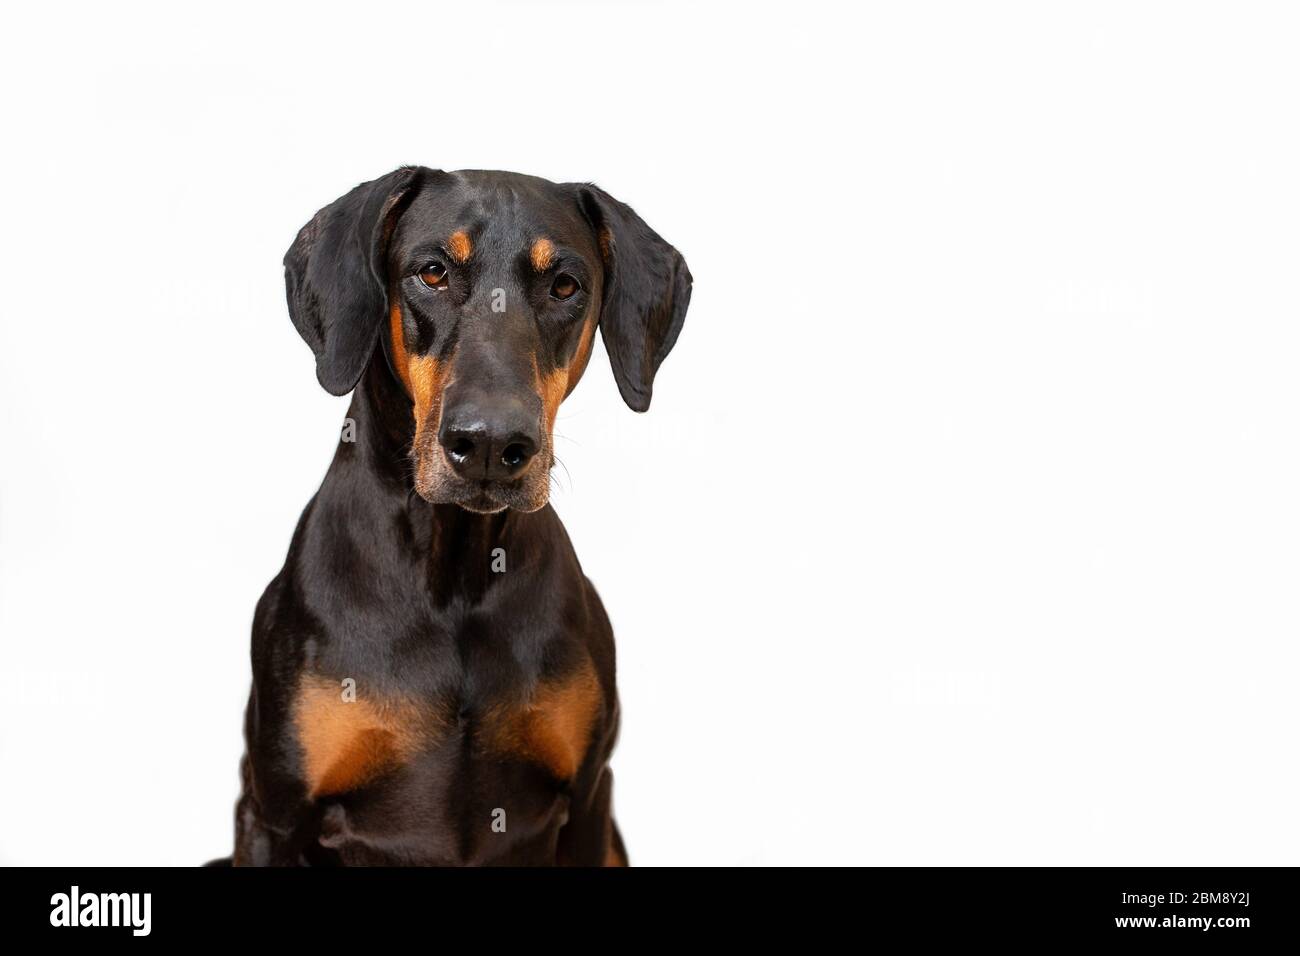 Black and tan Doberman dog sitting looking straight at camera, isolated on a white background with copy space. Natural floppy ears. Stock Photo